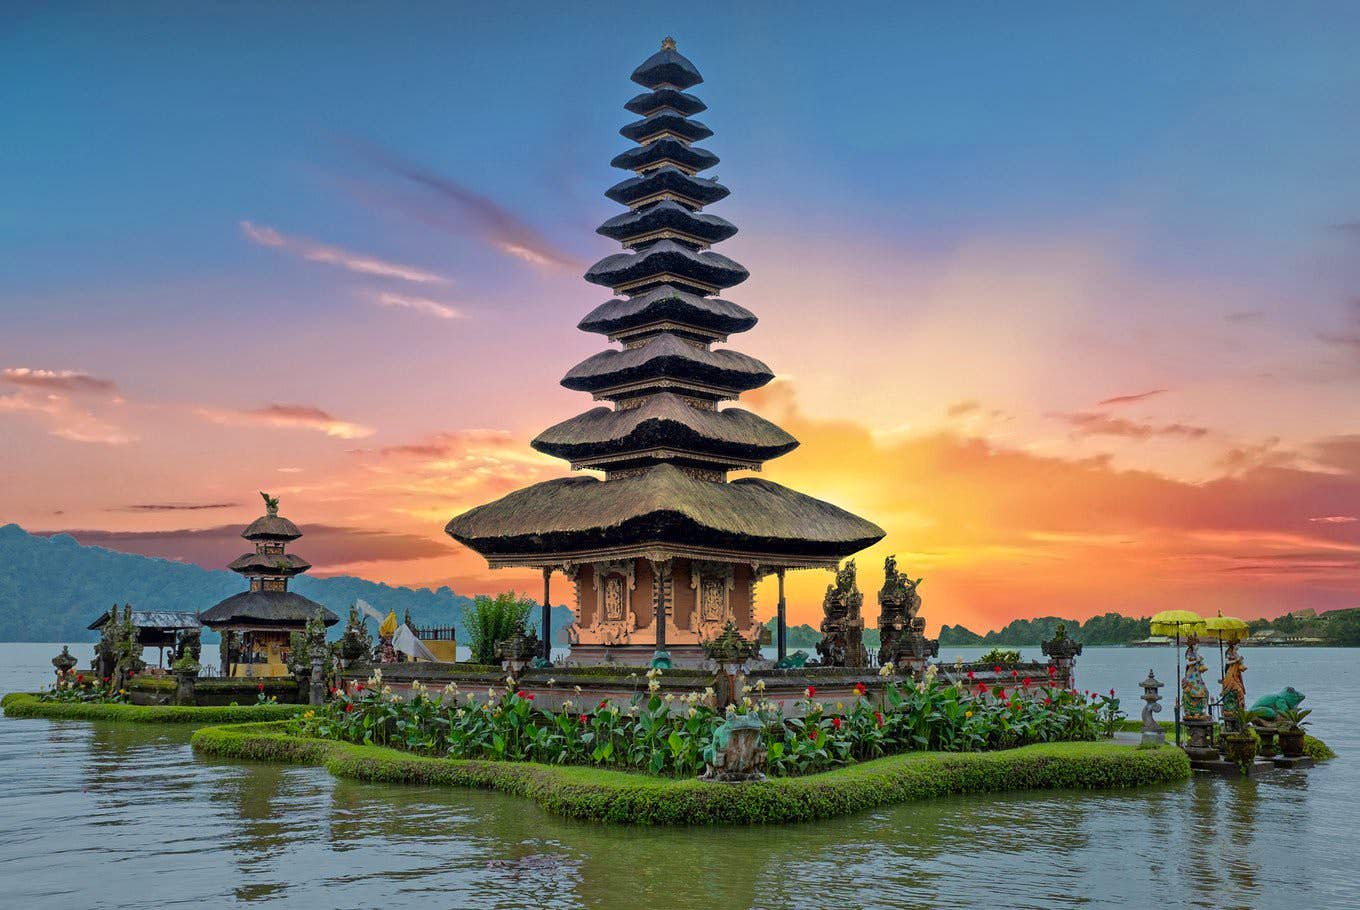 Explore Bali in a Private Car for 10 Hours